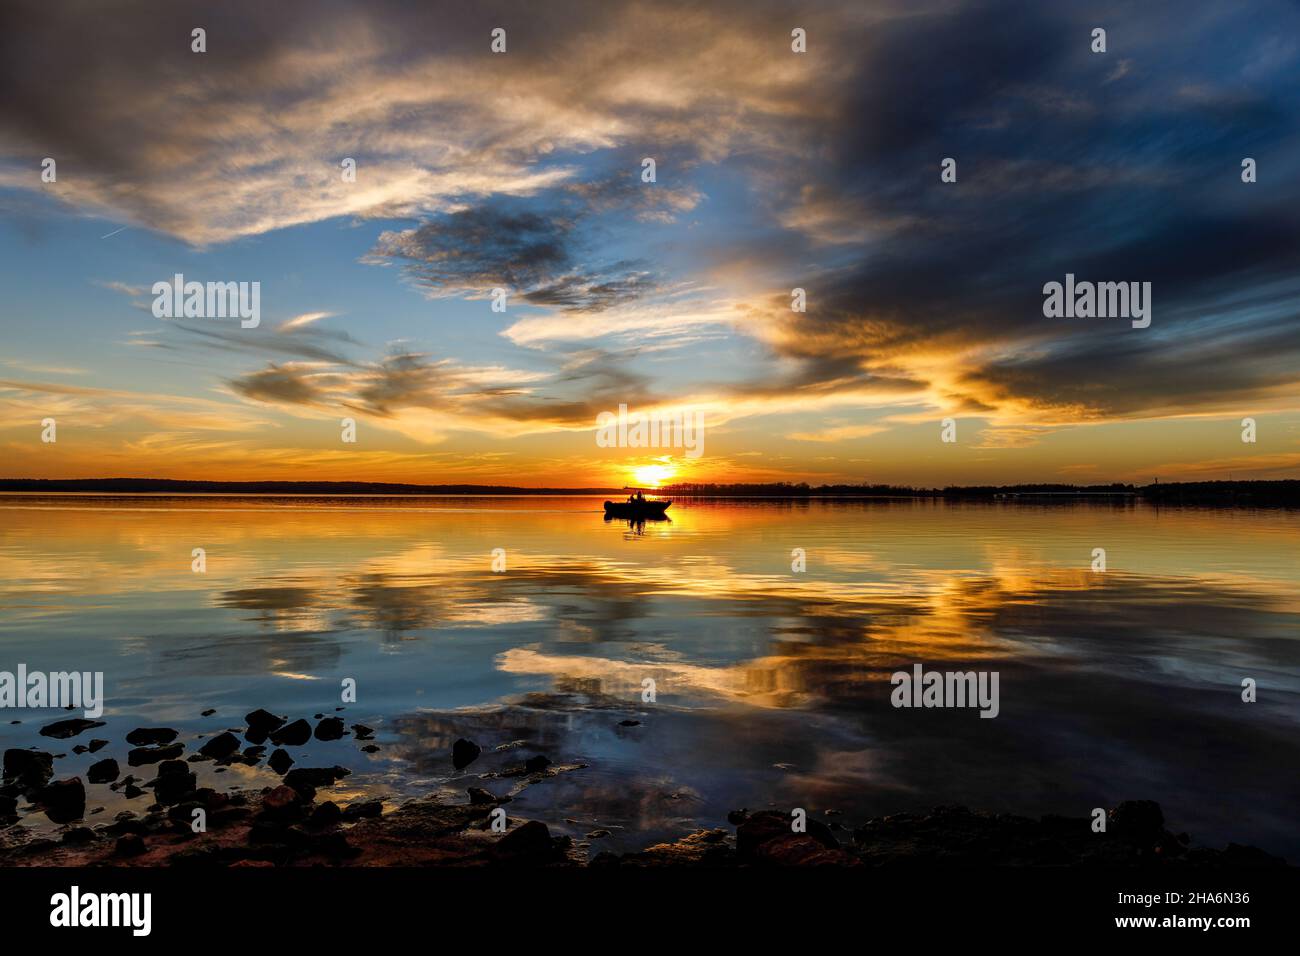 A boat on the lake at sunset with the clouds reflecting in the water. Stock Photo